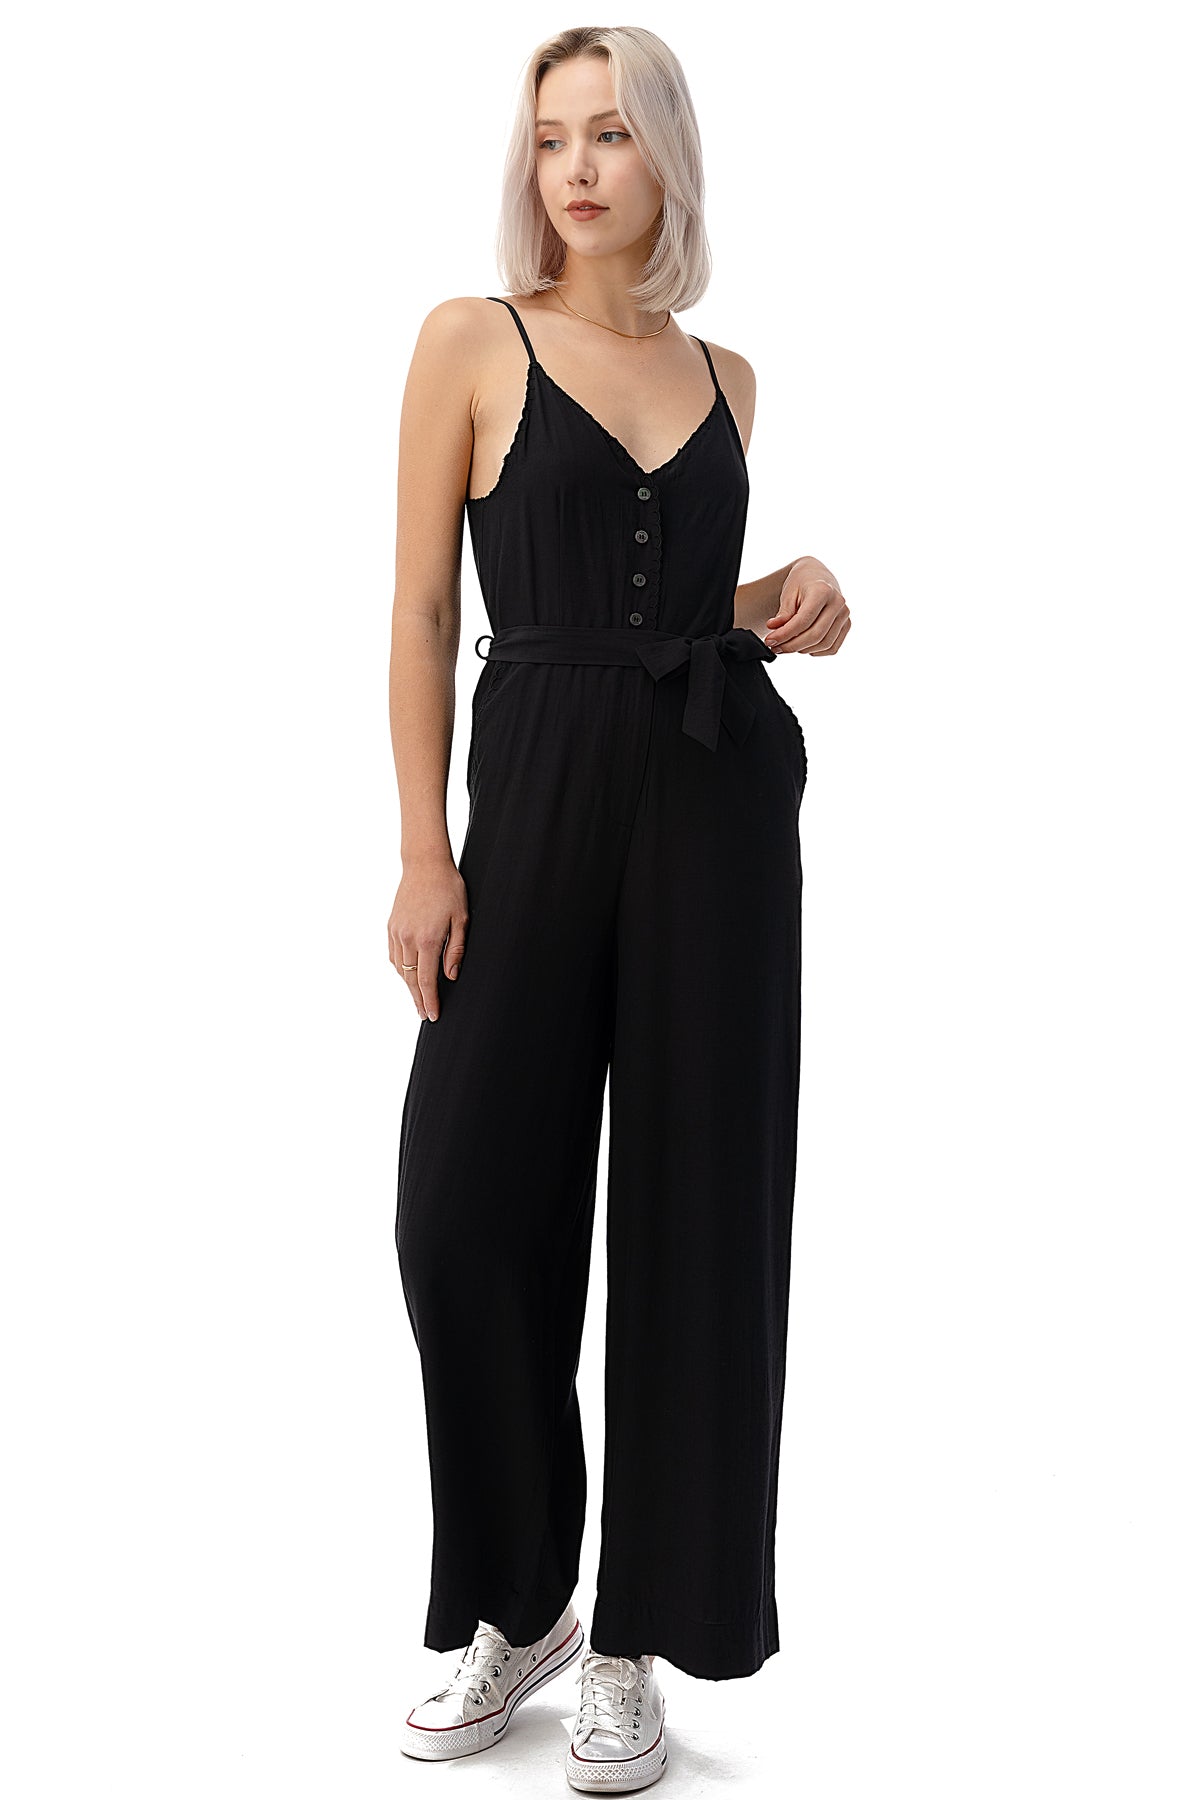 EDGY Land Girl's and Women's Cami StraPPEd Self Tie Buttoned Front High Waist Slit Pocket ankle length Jumpsuit